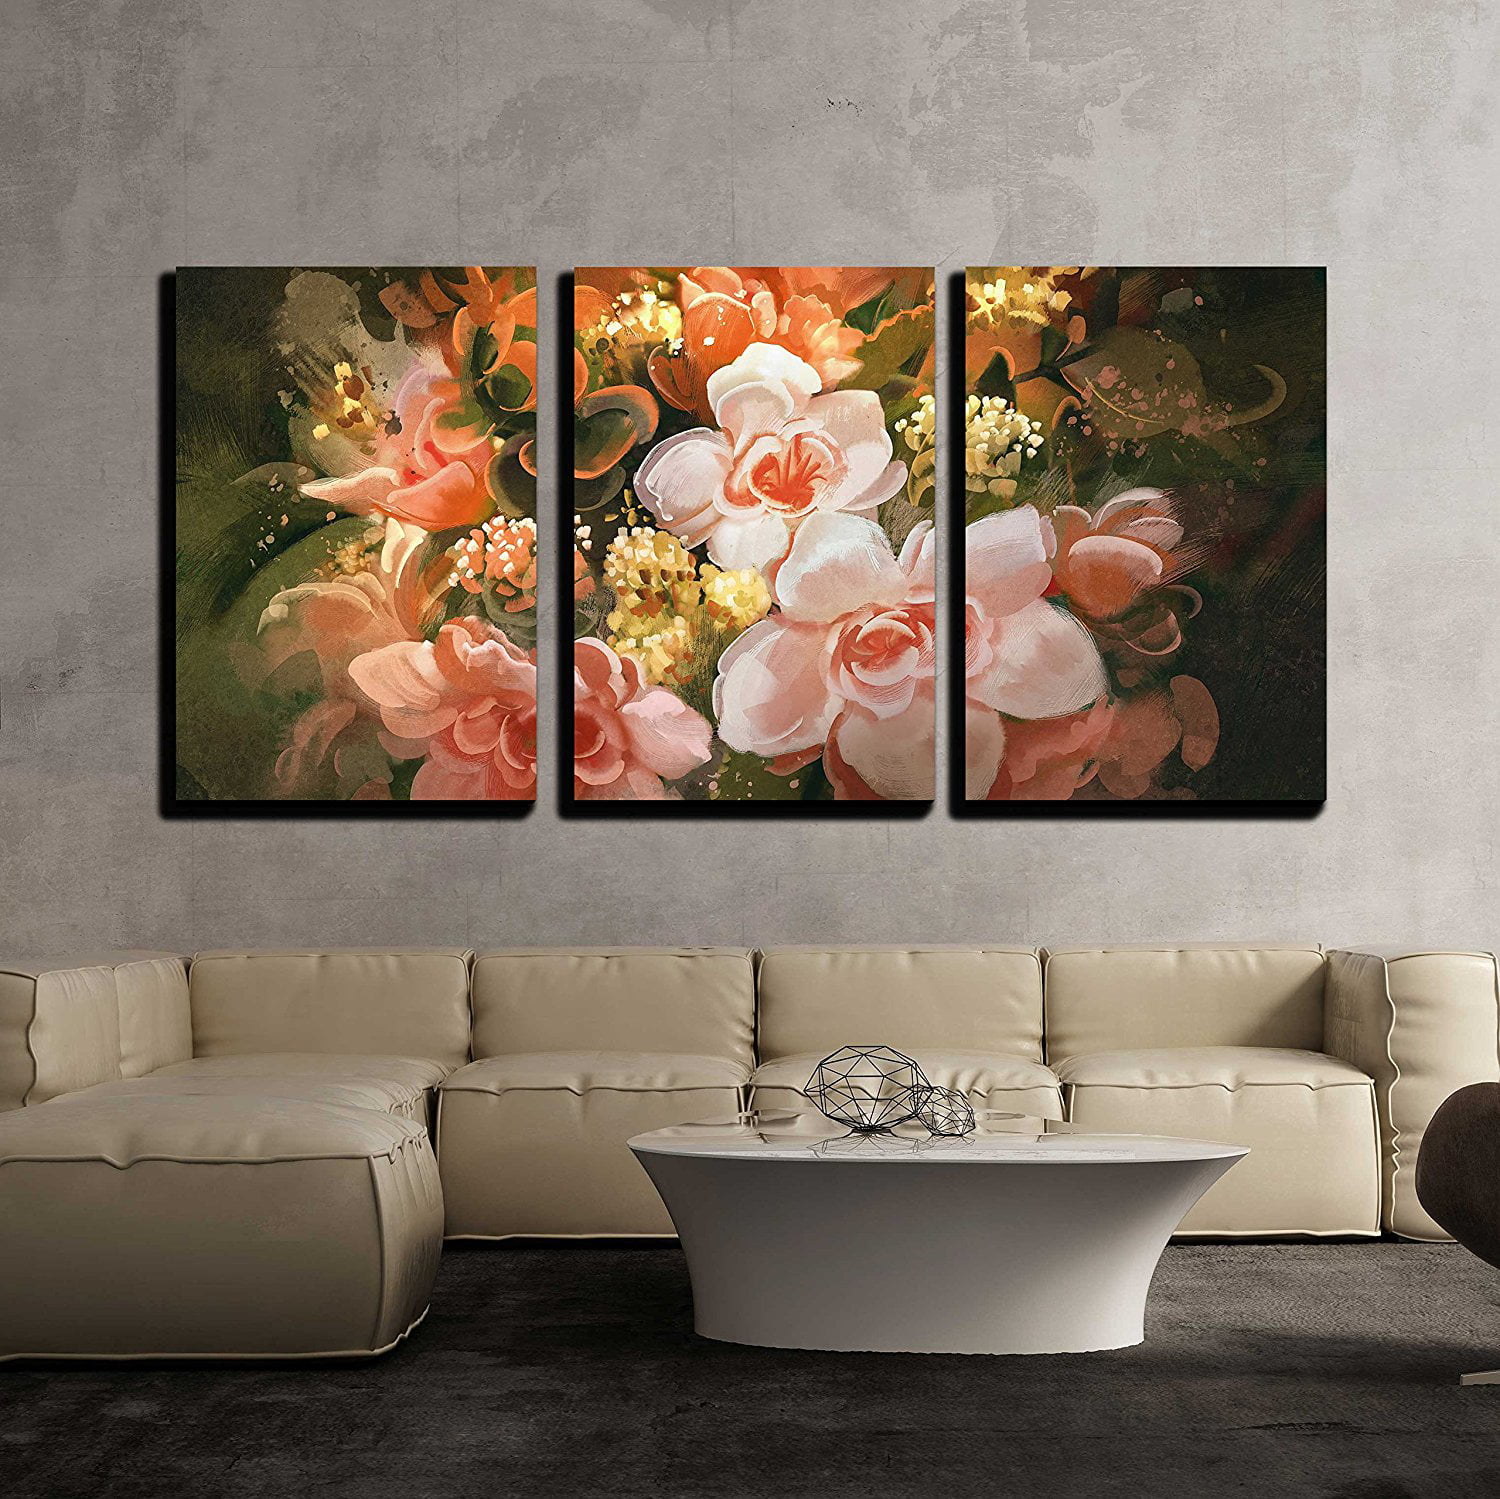 Wall26 3 Piece Canvas Wall Art - Illustration - Beautiful Flowers,Color